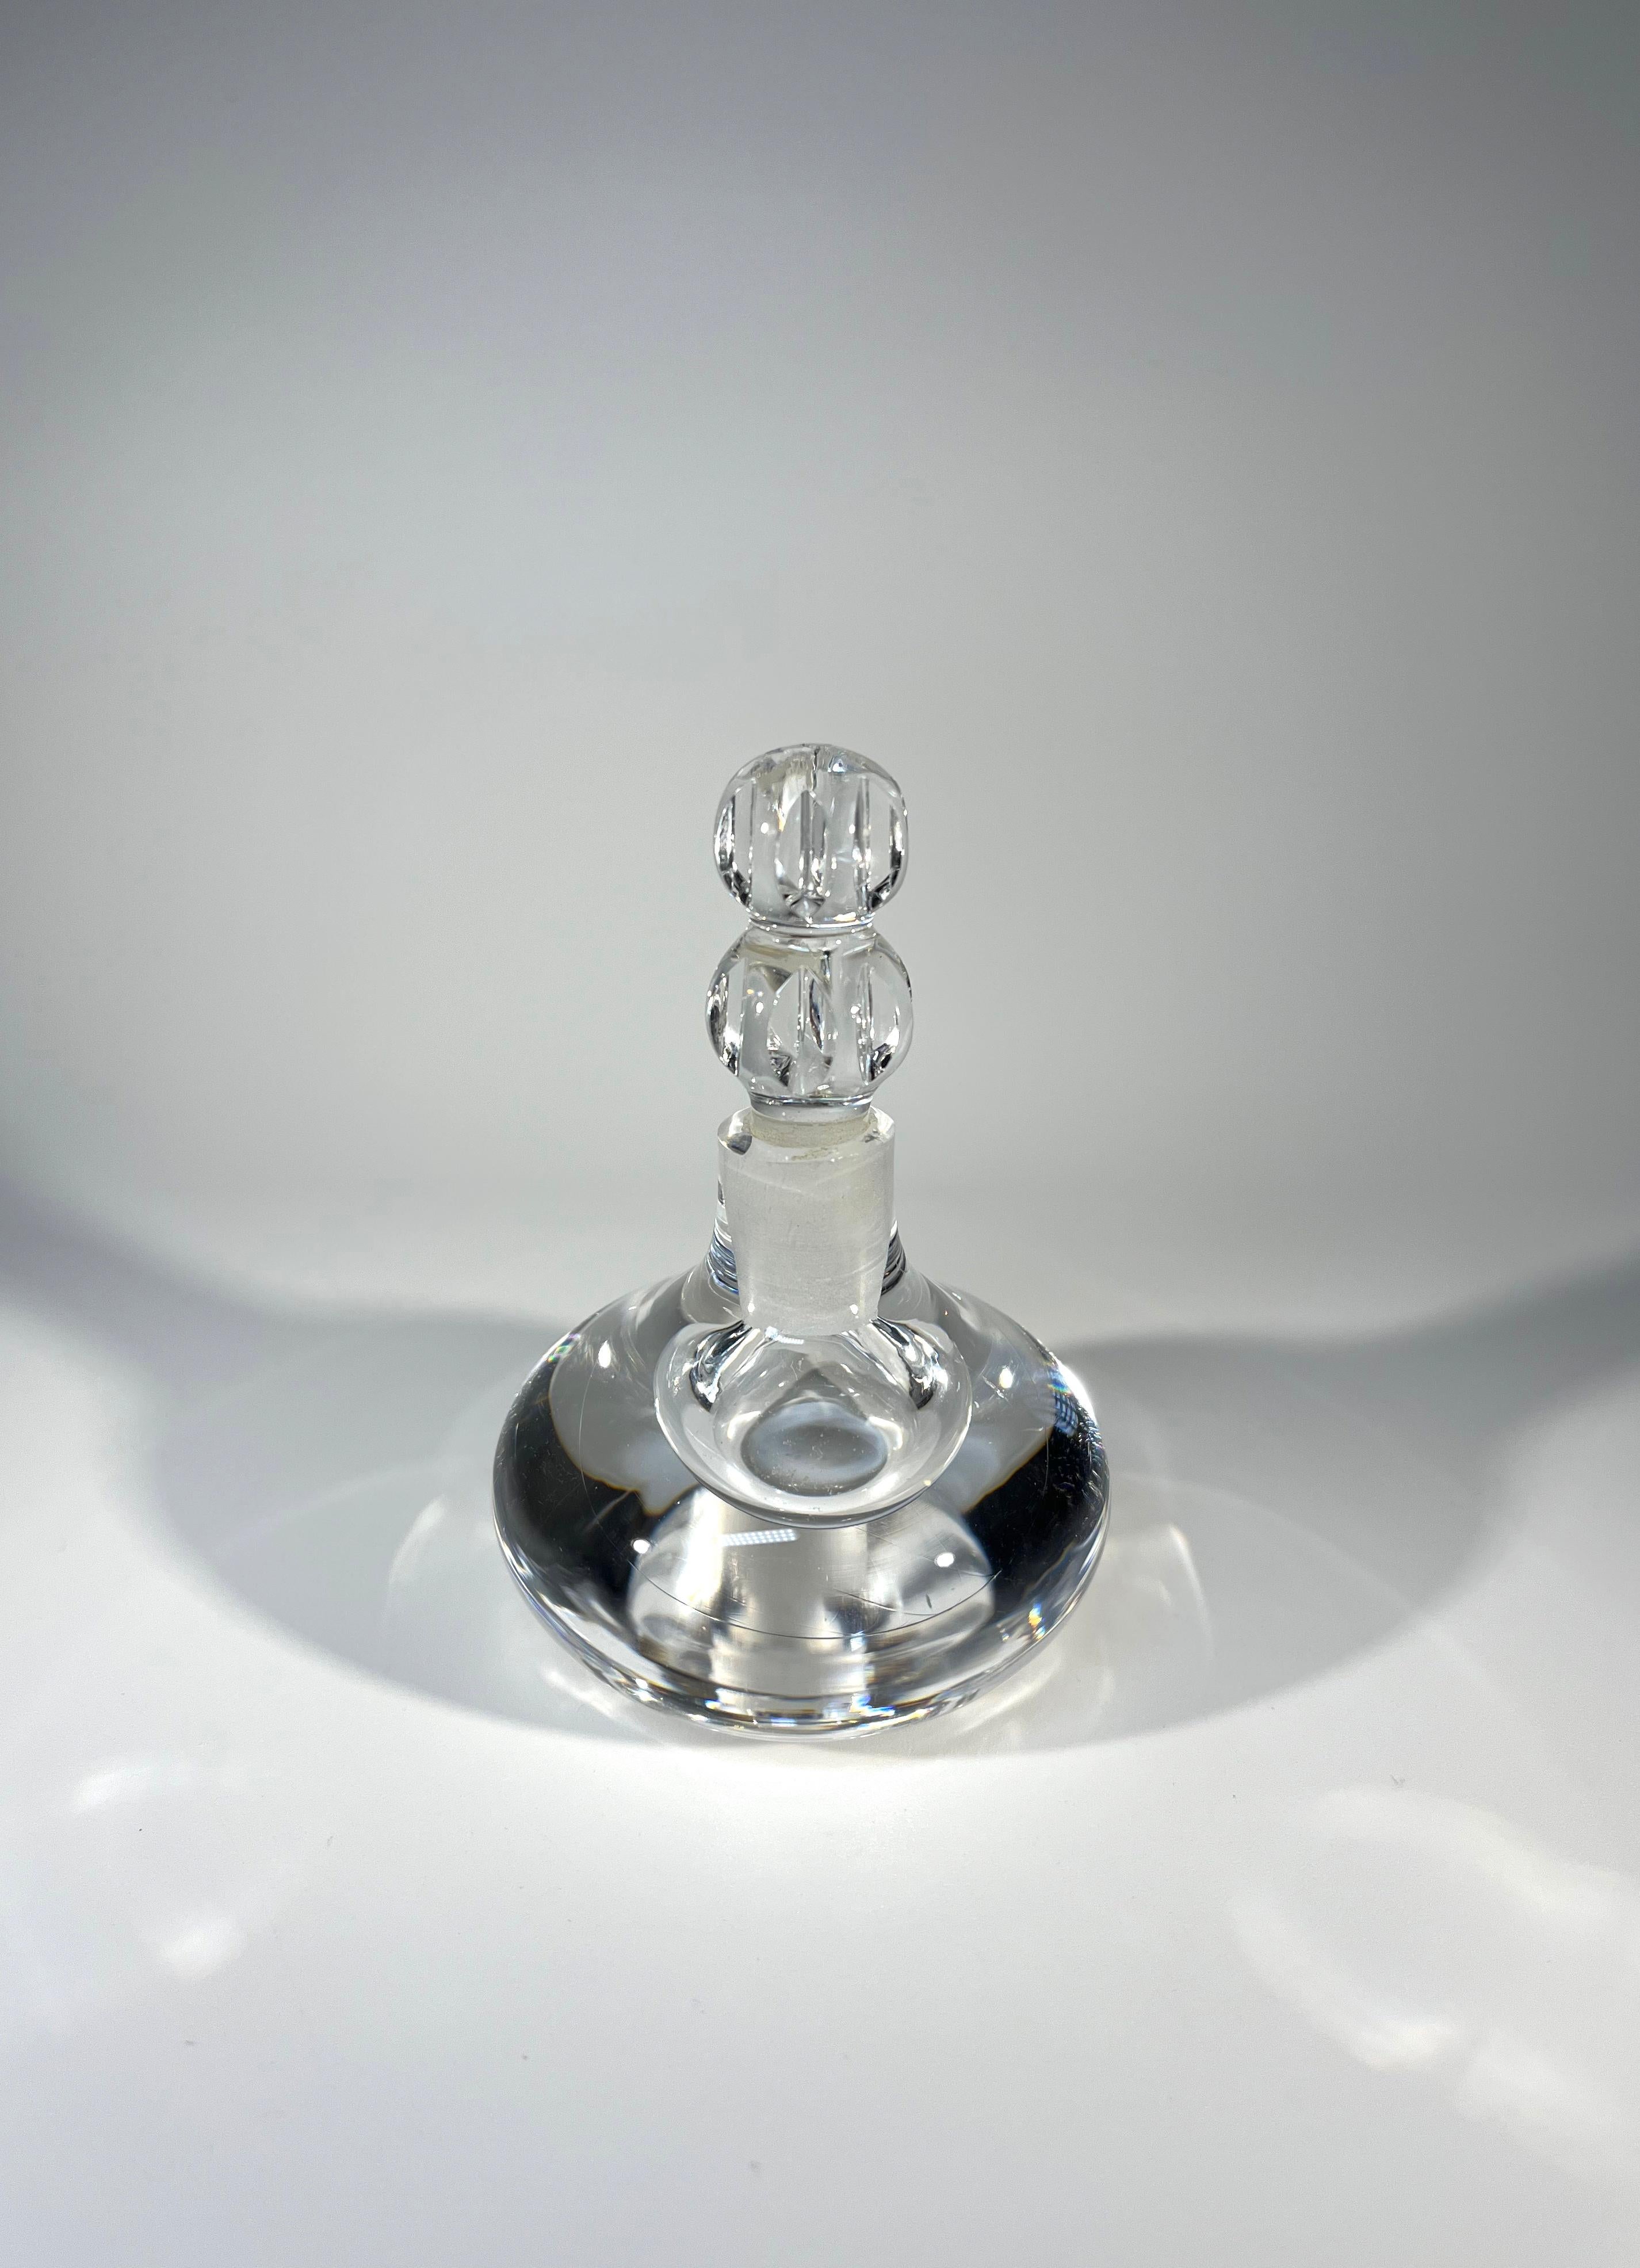 Beautiful and pure, crystal clear perfume bottle by Orrefors, Sweden
Unusually faceted, cut crystal stopper completes this most appealing piece
Circa 1980's 
Height with stopper 3.5 inch, Diameter 2.25 inch
In very good condition
Wear consistent